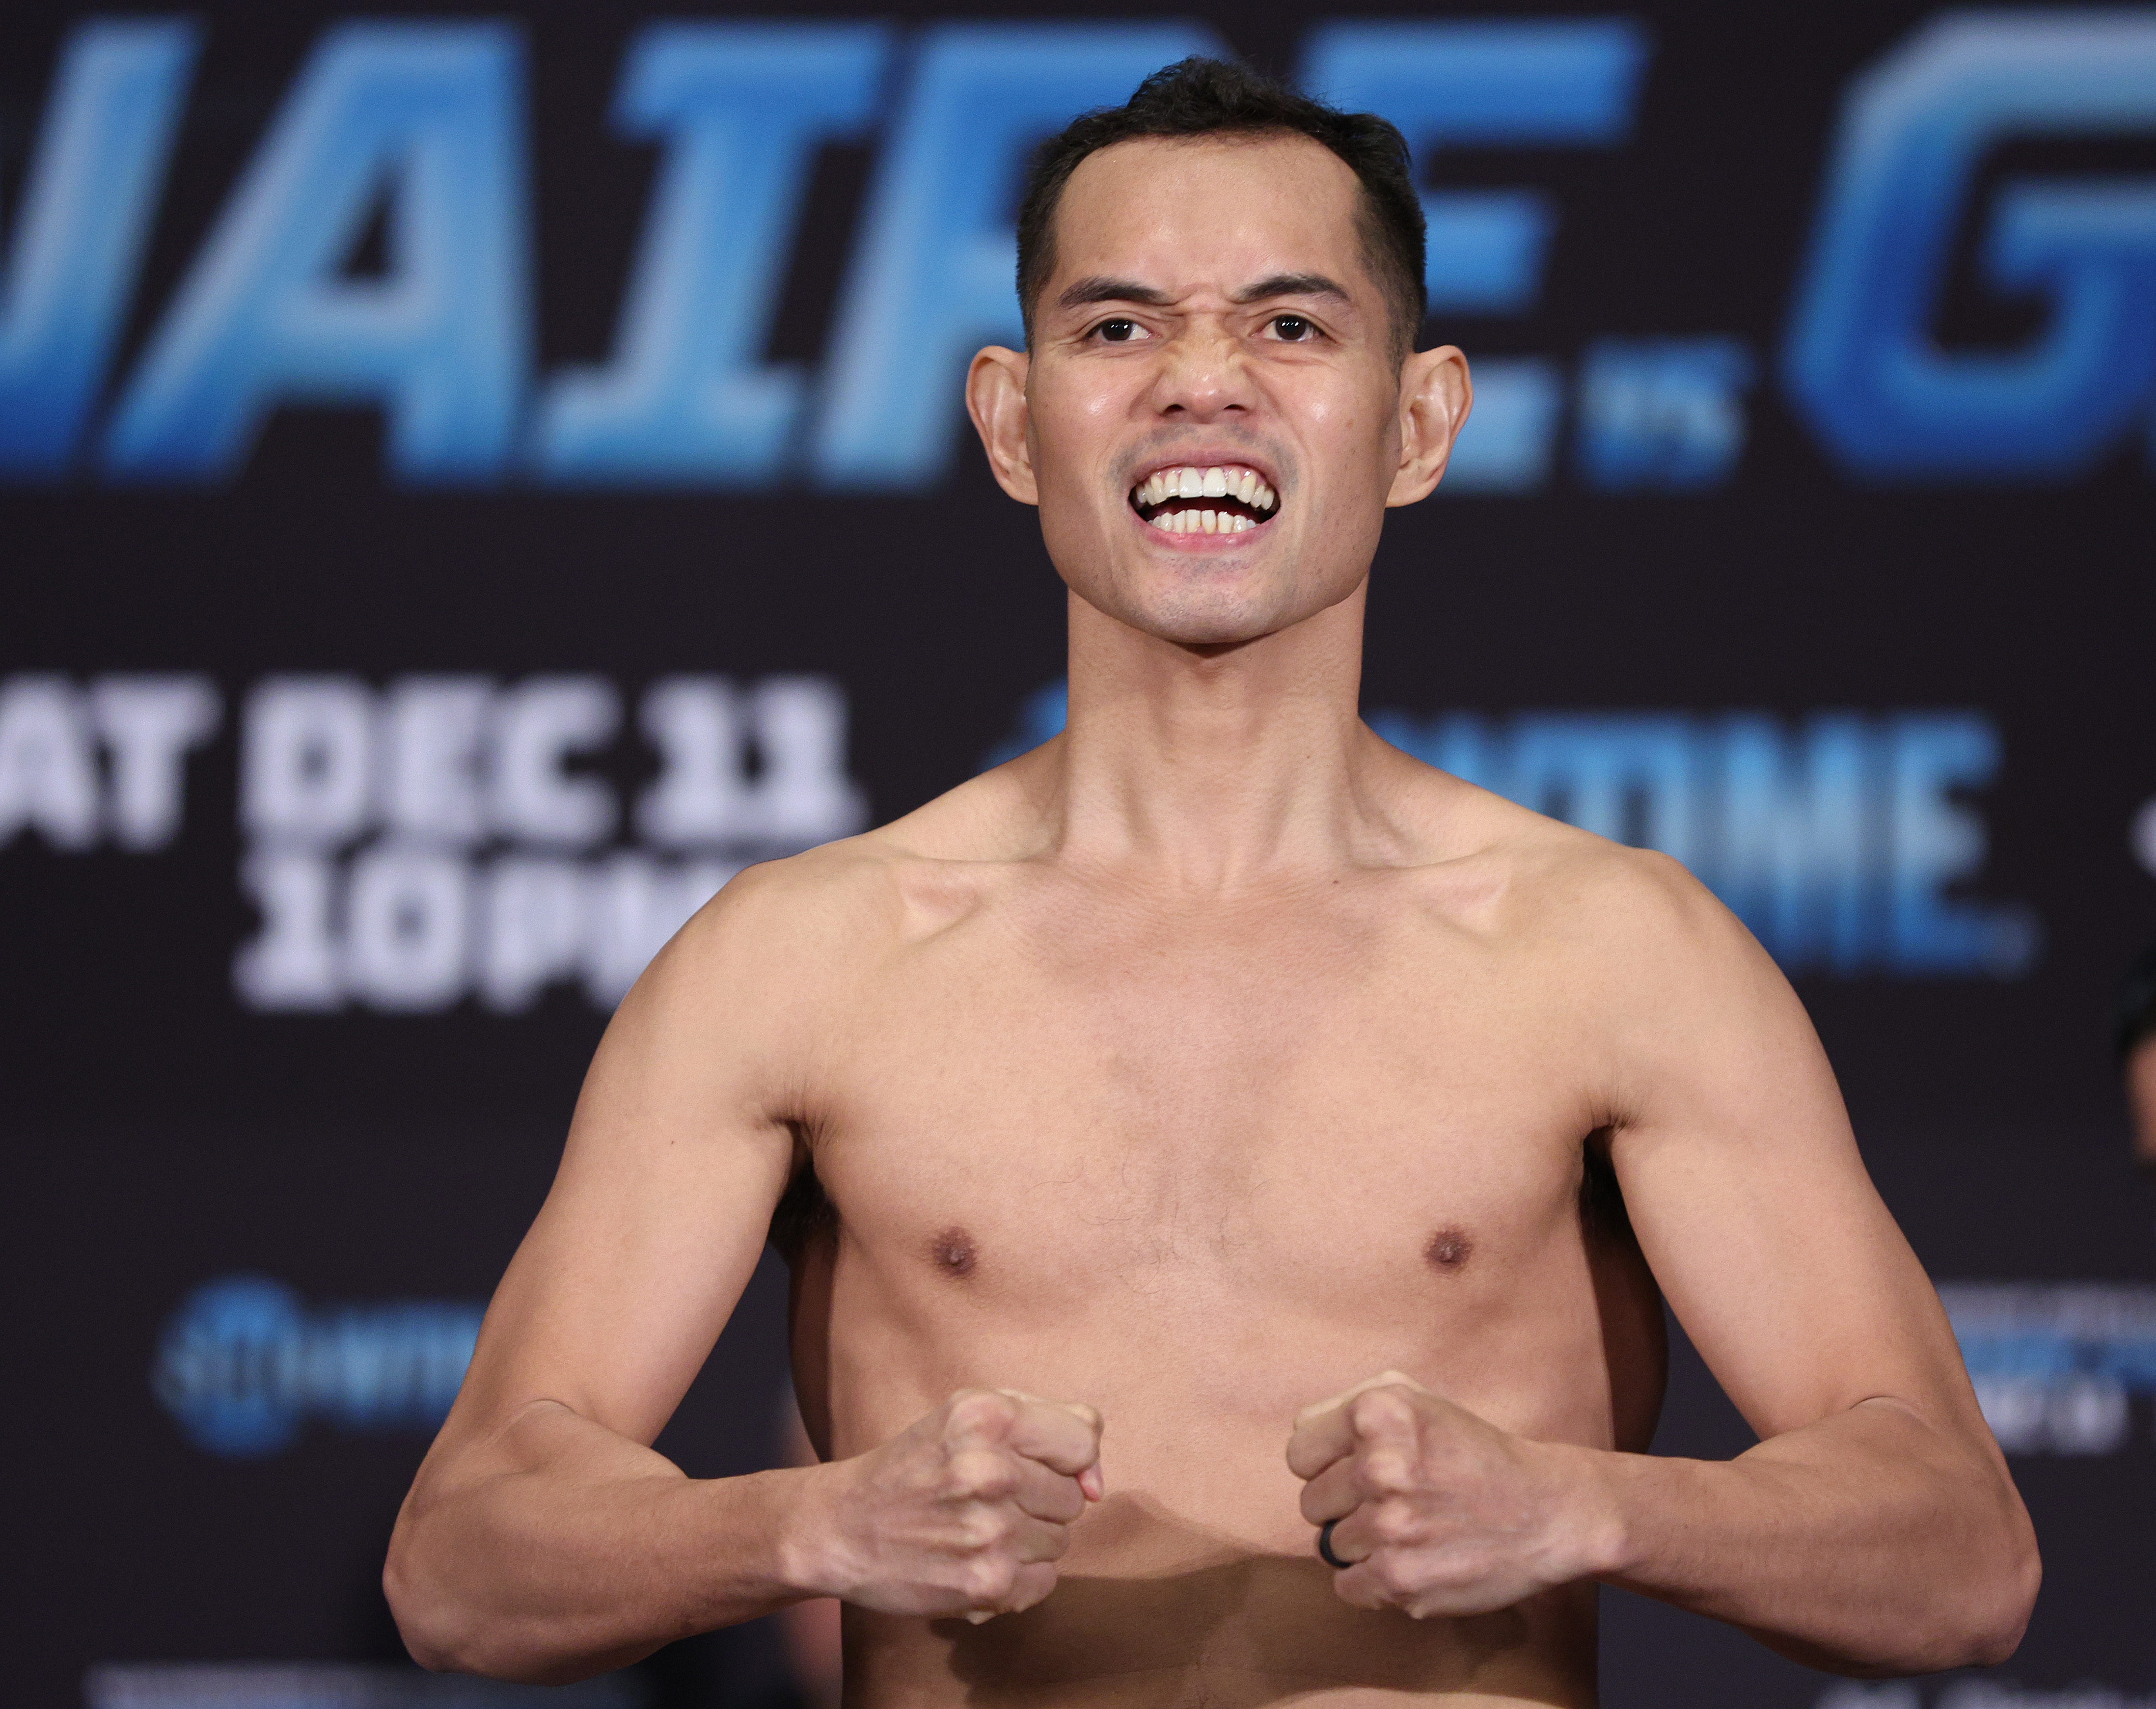 Nonito Donaire has his eyes set on winning a major world title in a fifth weight class.